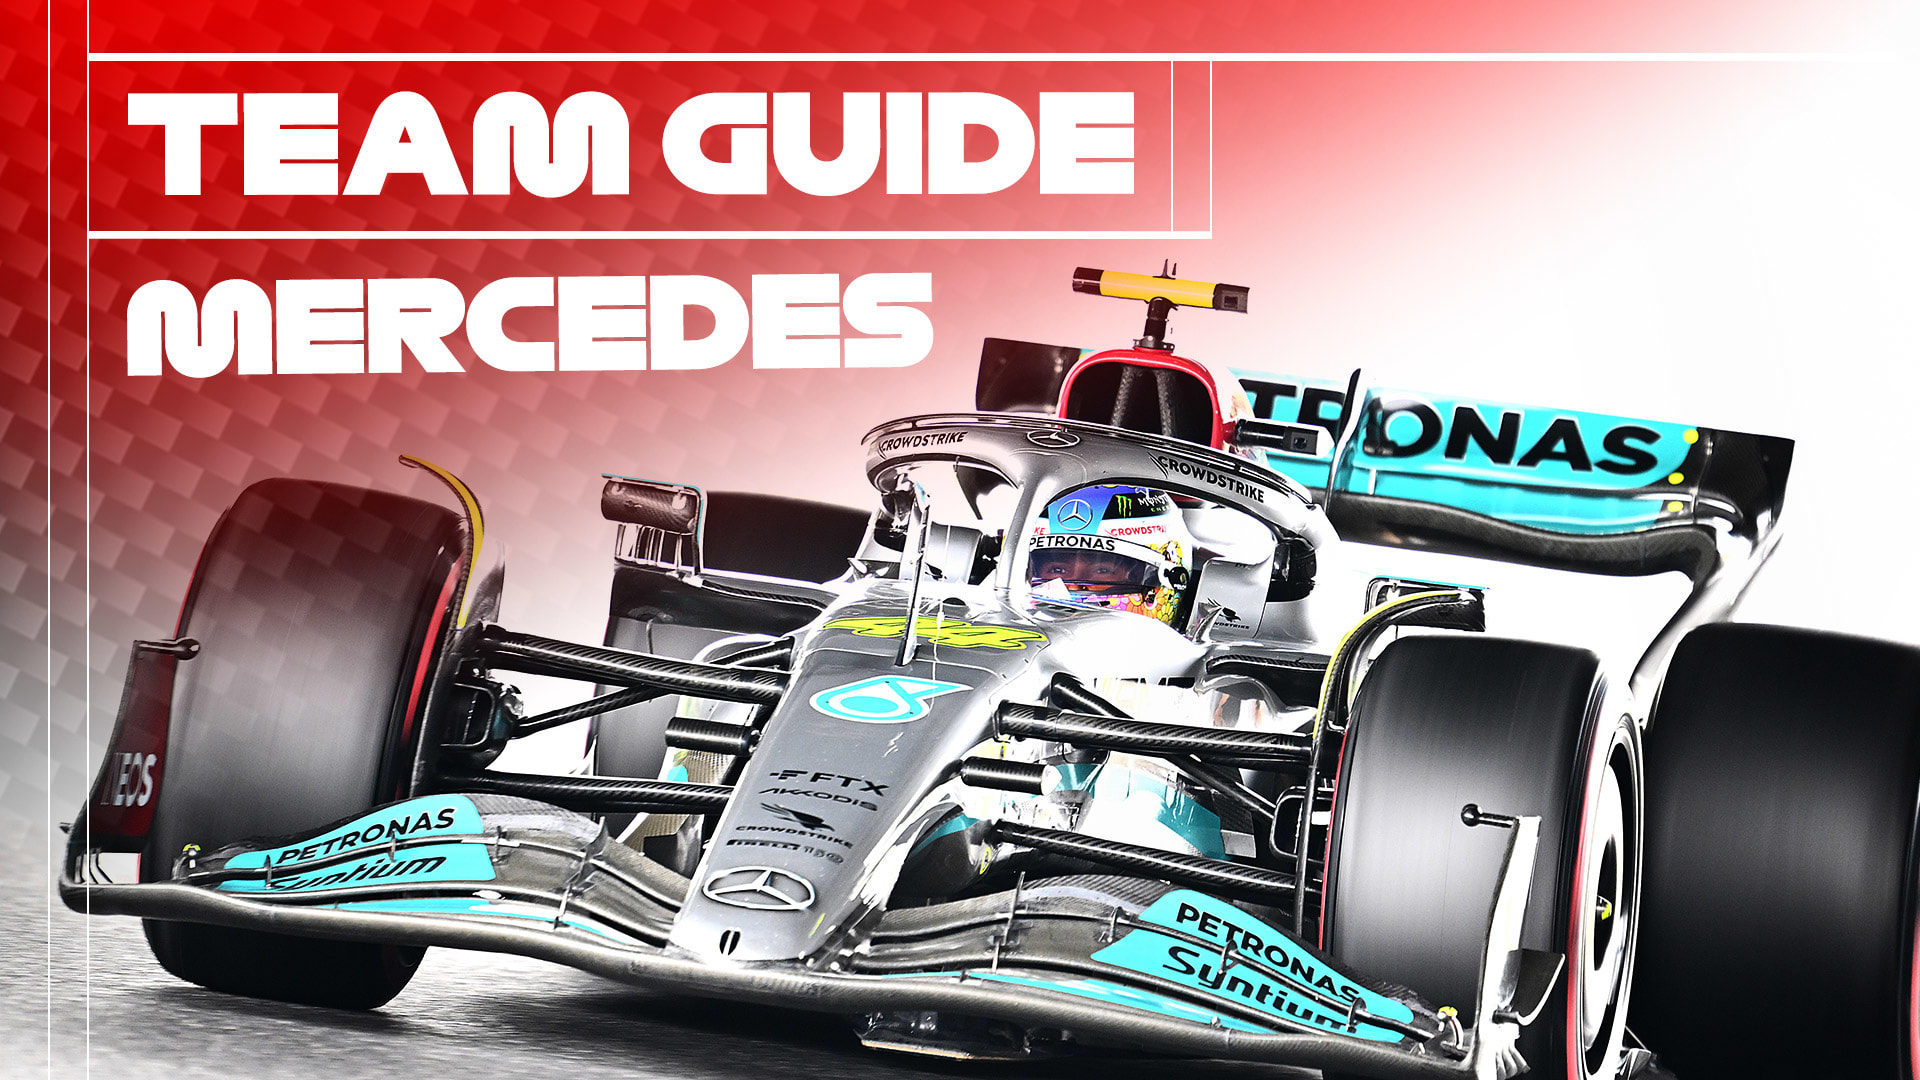 TEAM GUIDE: A look at Mercedes' amazing F1 success, their recent struggles  – and how they stack up for 2023